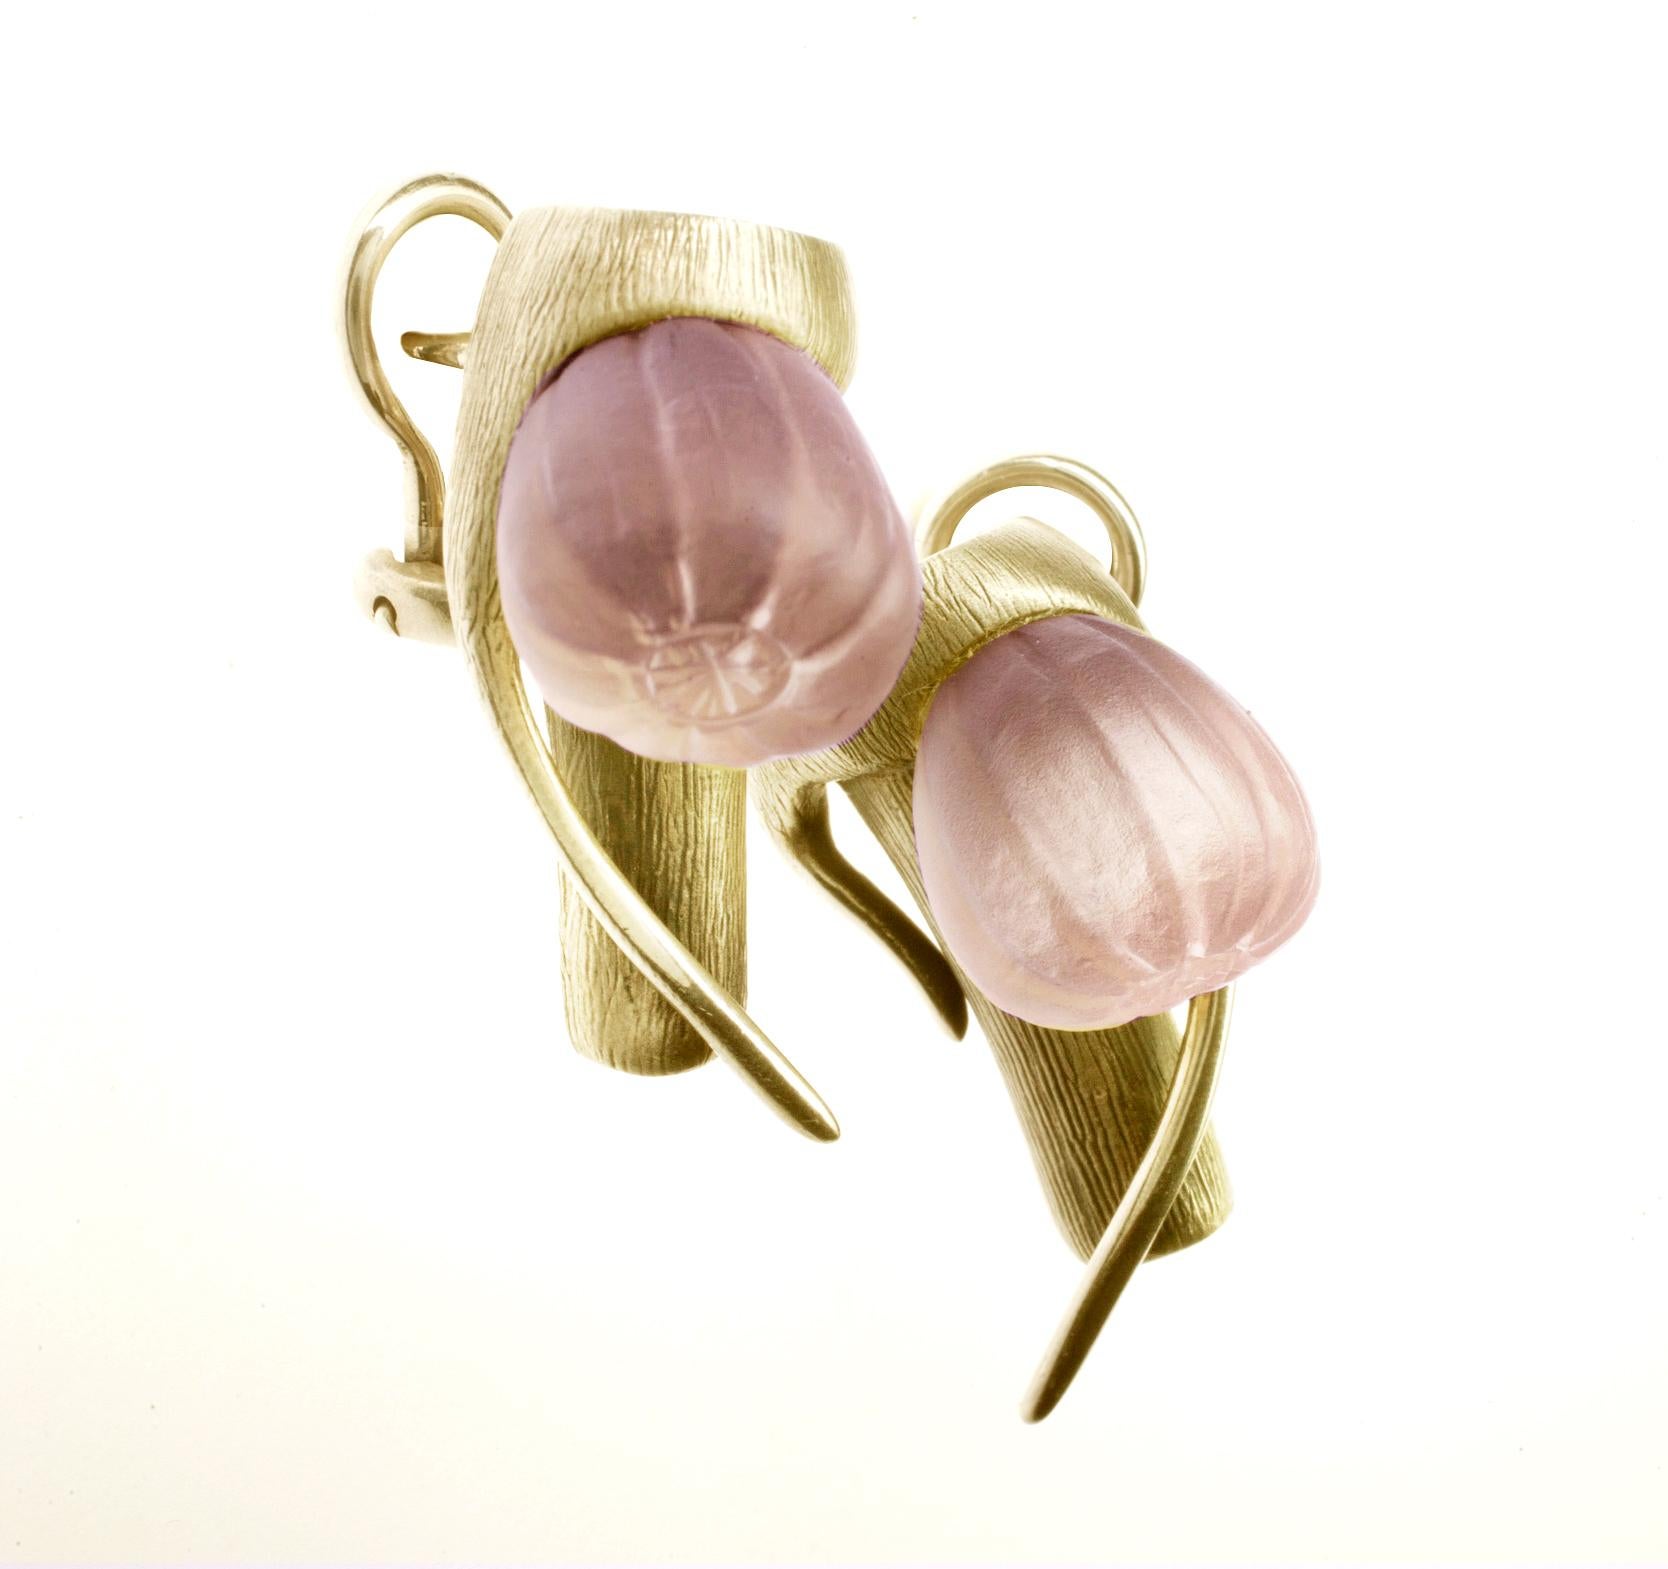 These contemporary Fig cocktail earrings are made of 14 karat yellow gold with rose onyx. The collection was featured in Harper's Bazaar UA editorial, published in an issue. The earrings were chosen by actress Anne Ratte-Polle for the 64th Berlinale